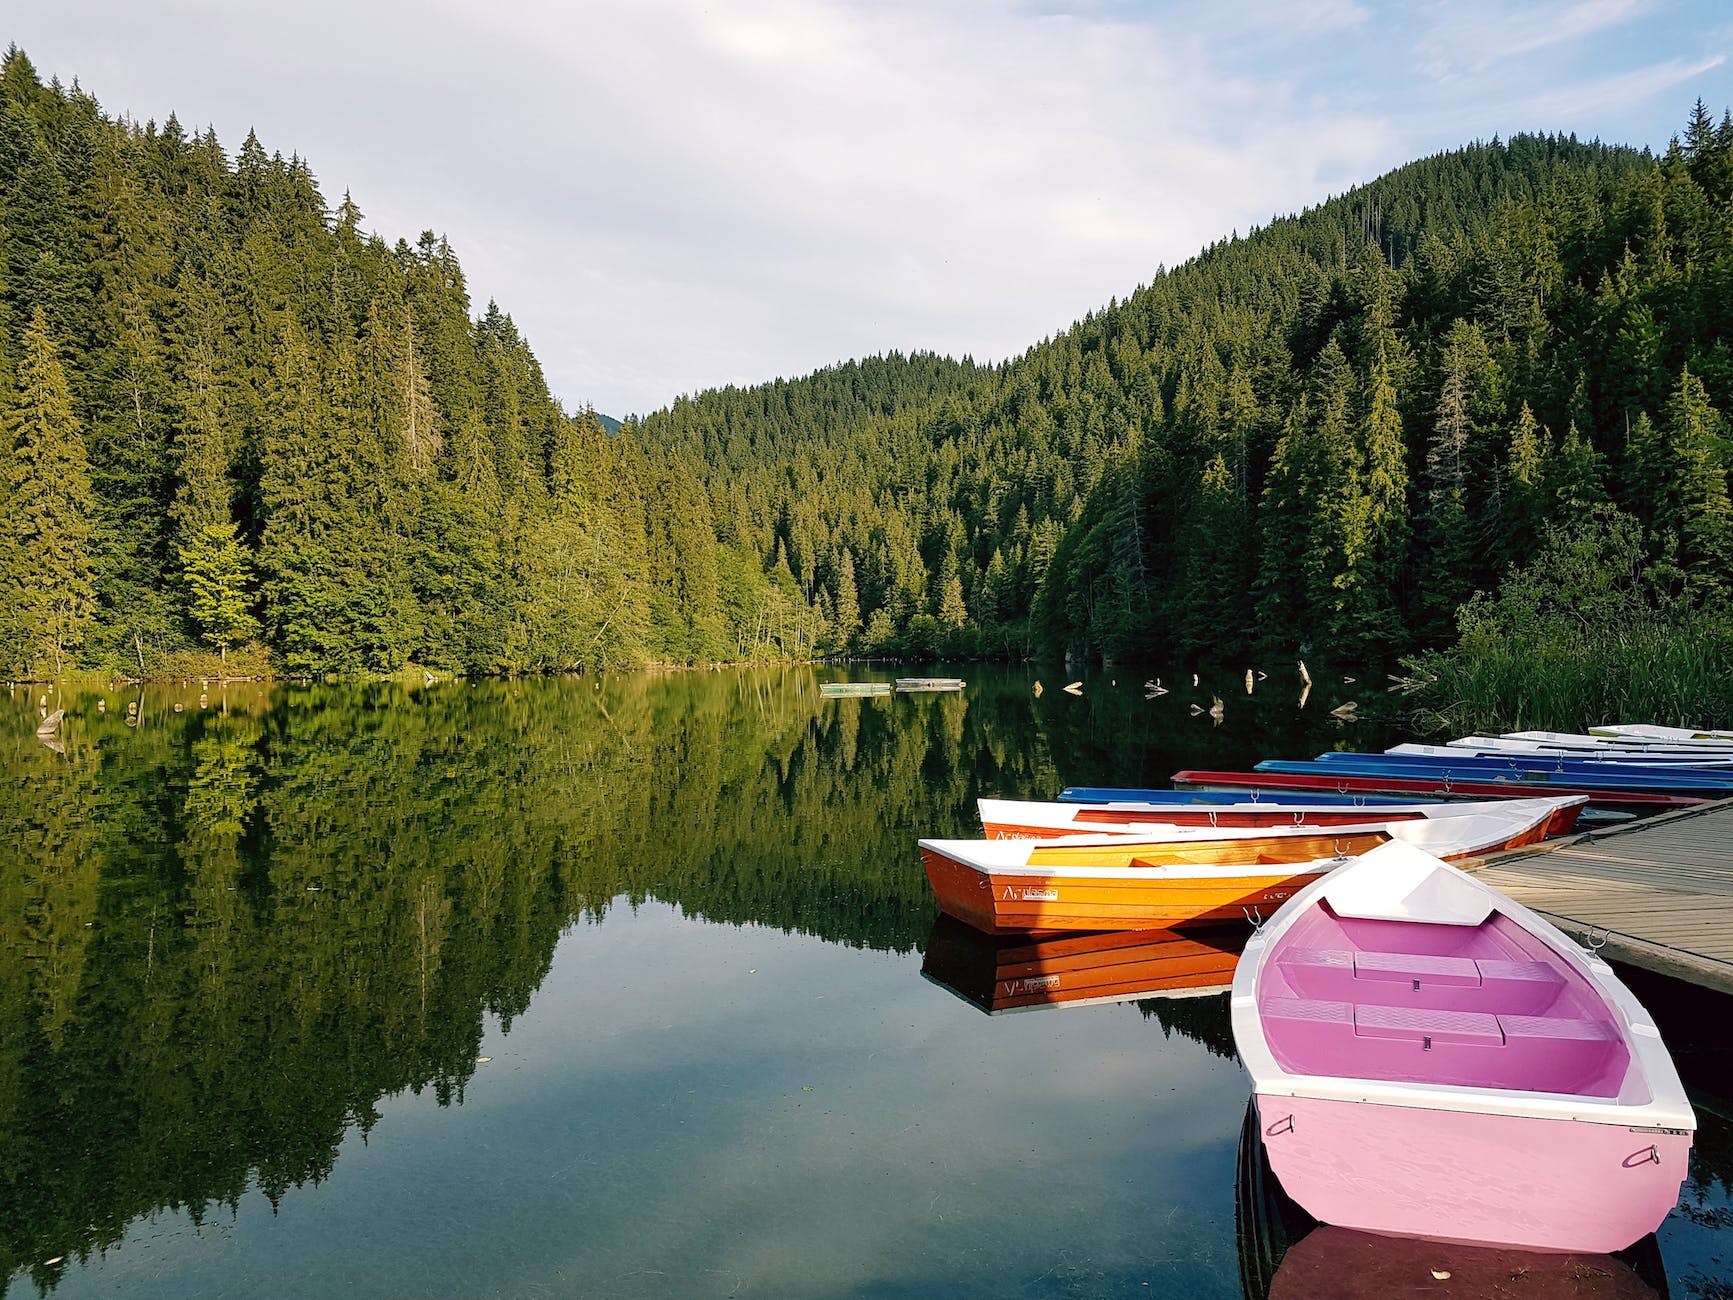 boats on calm body of water surrounded by trees